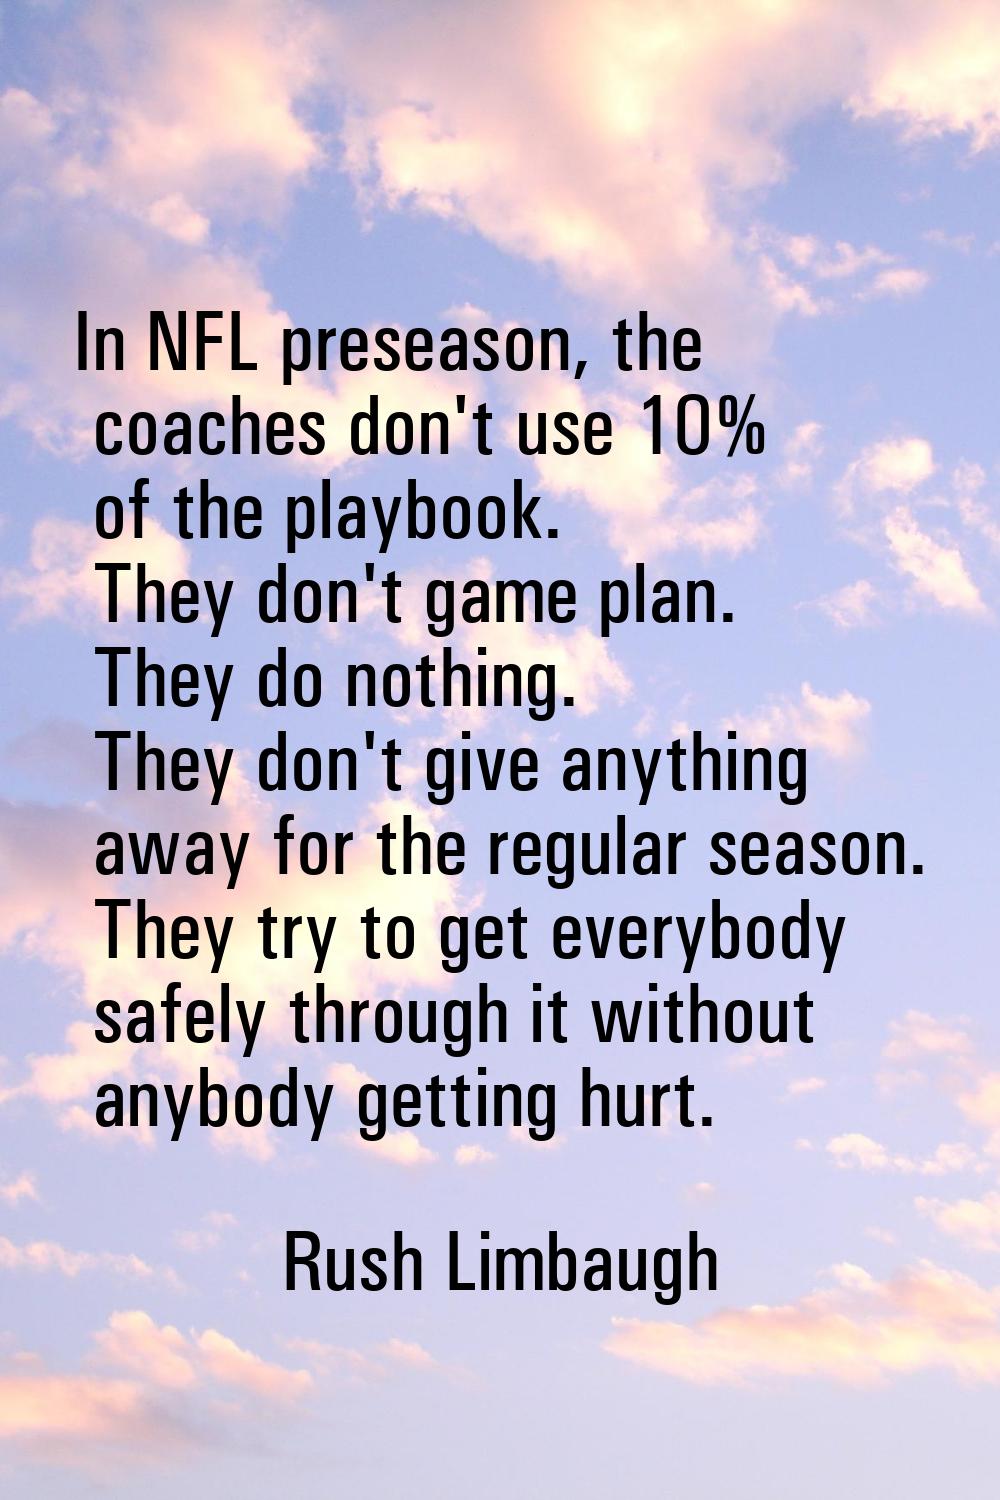 In NFL preseason, the coaches don't use 10% of the playbook. They don't game plan. They do nothing.